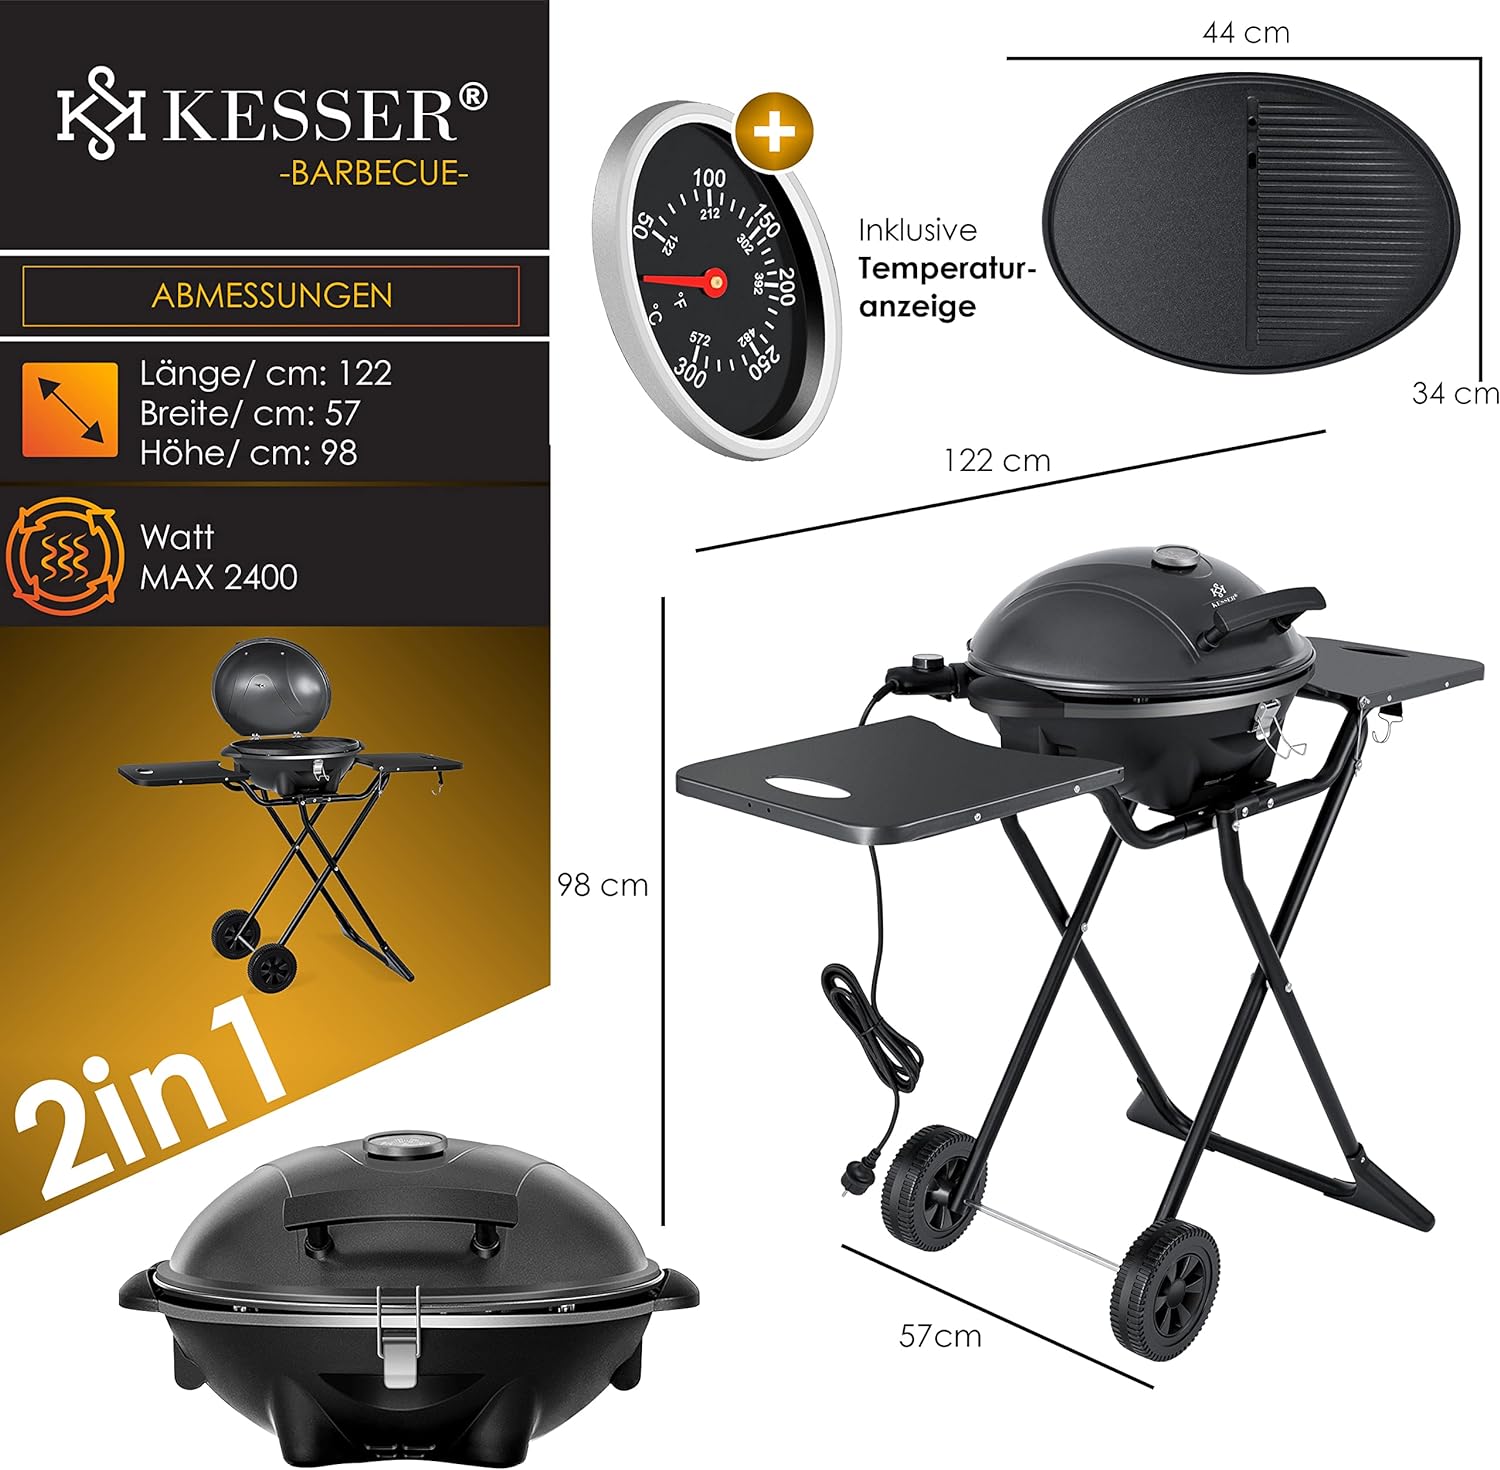 KESSER® Electric Grill 2-in-1 Table Grill with Lid and Stand Max. 2400 Watt Foldable Thermometer Non-Stick Coating Grill Plate Storage Tables 2 Wheels Red